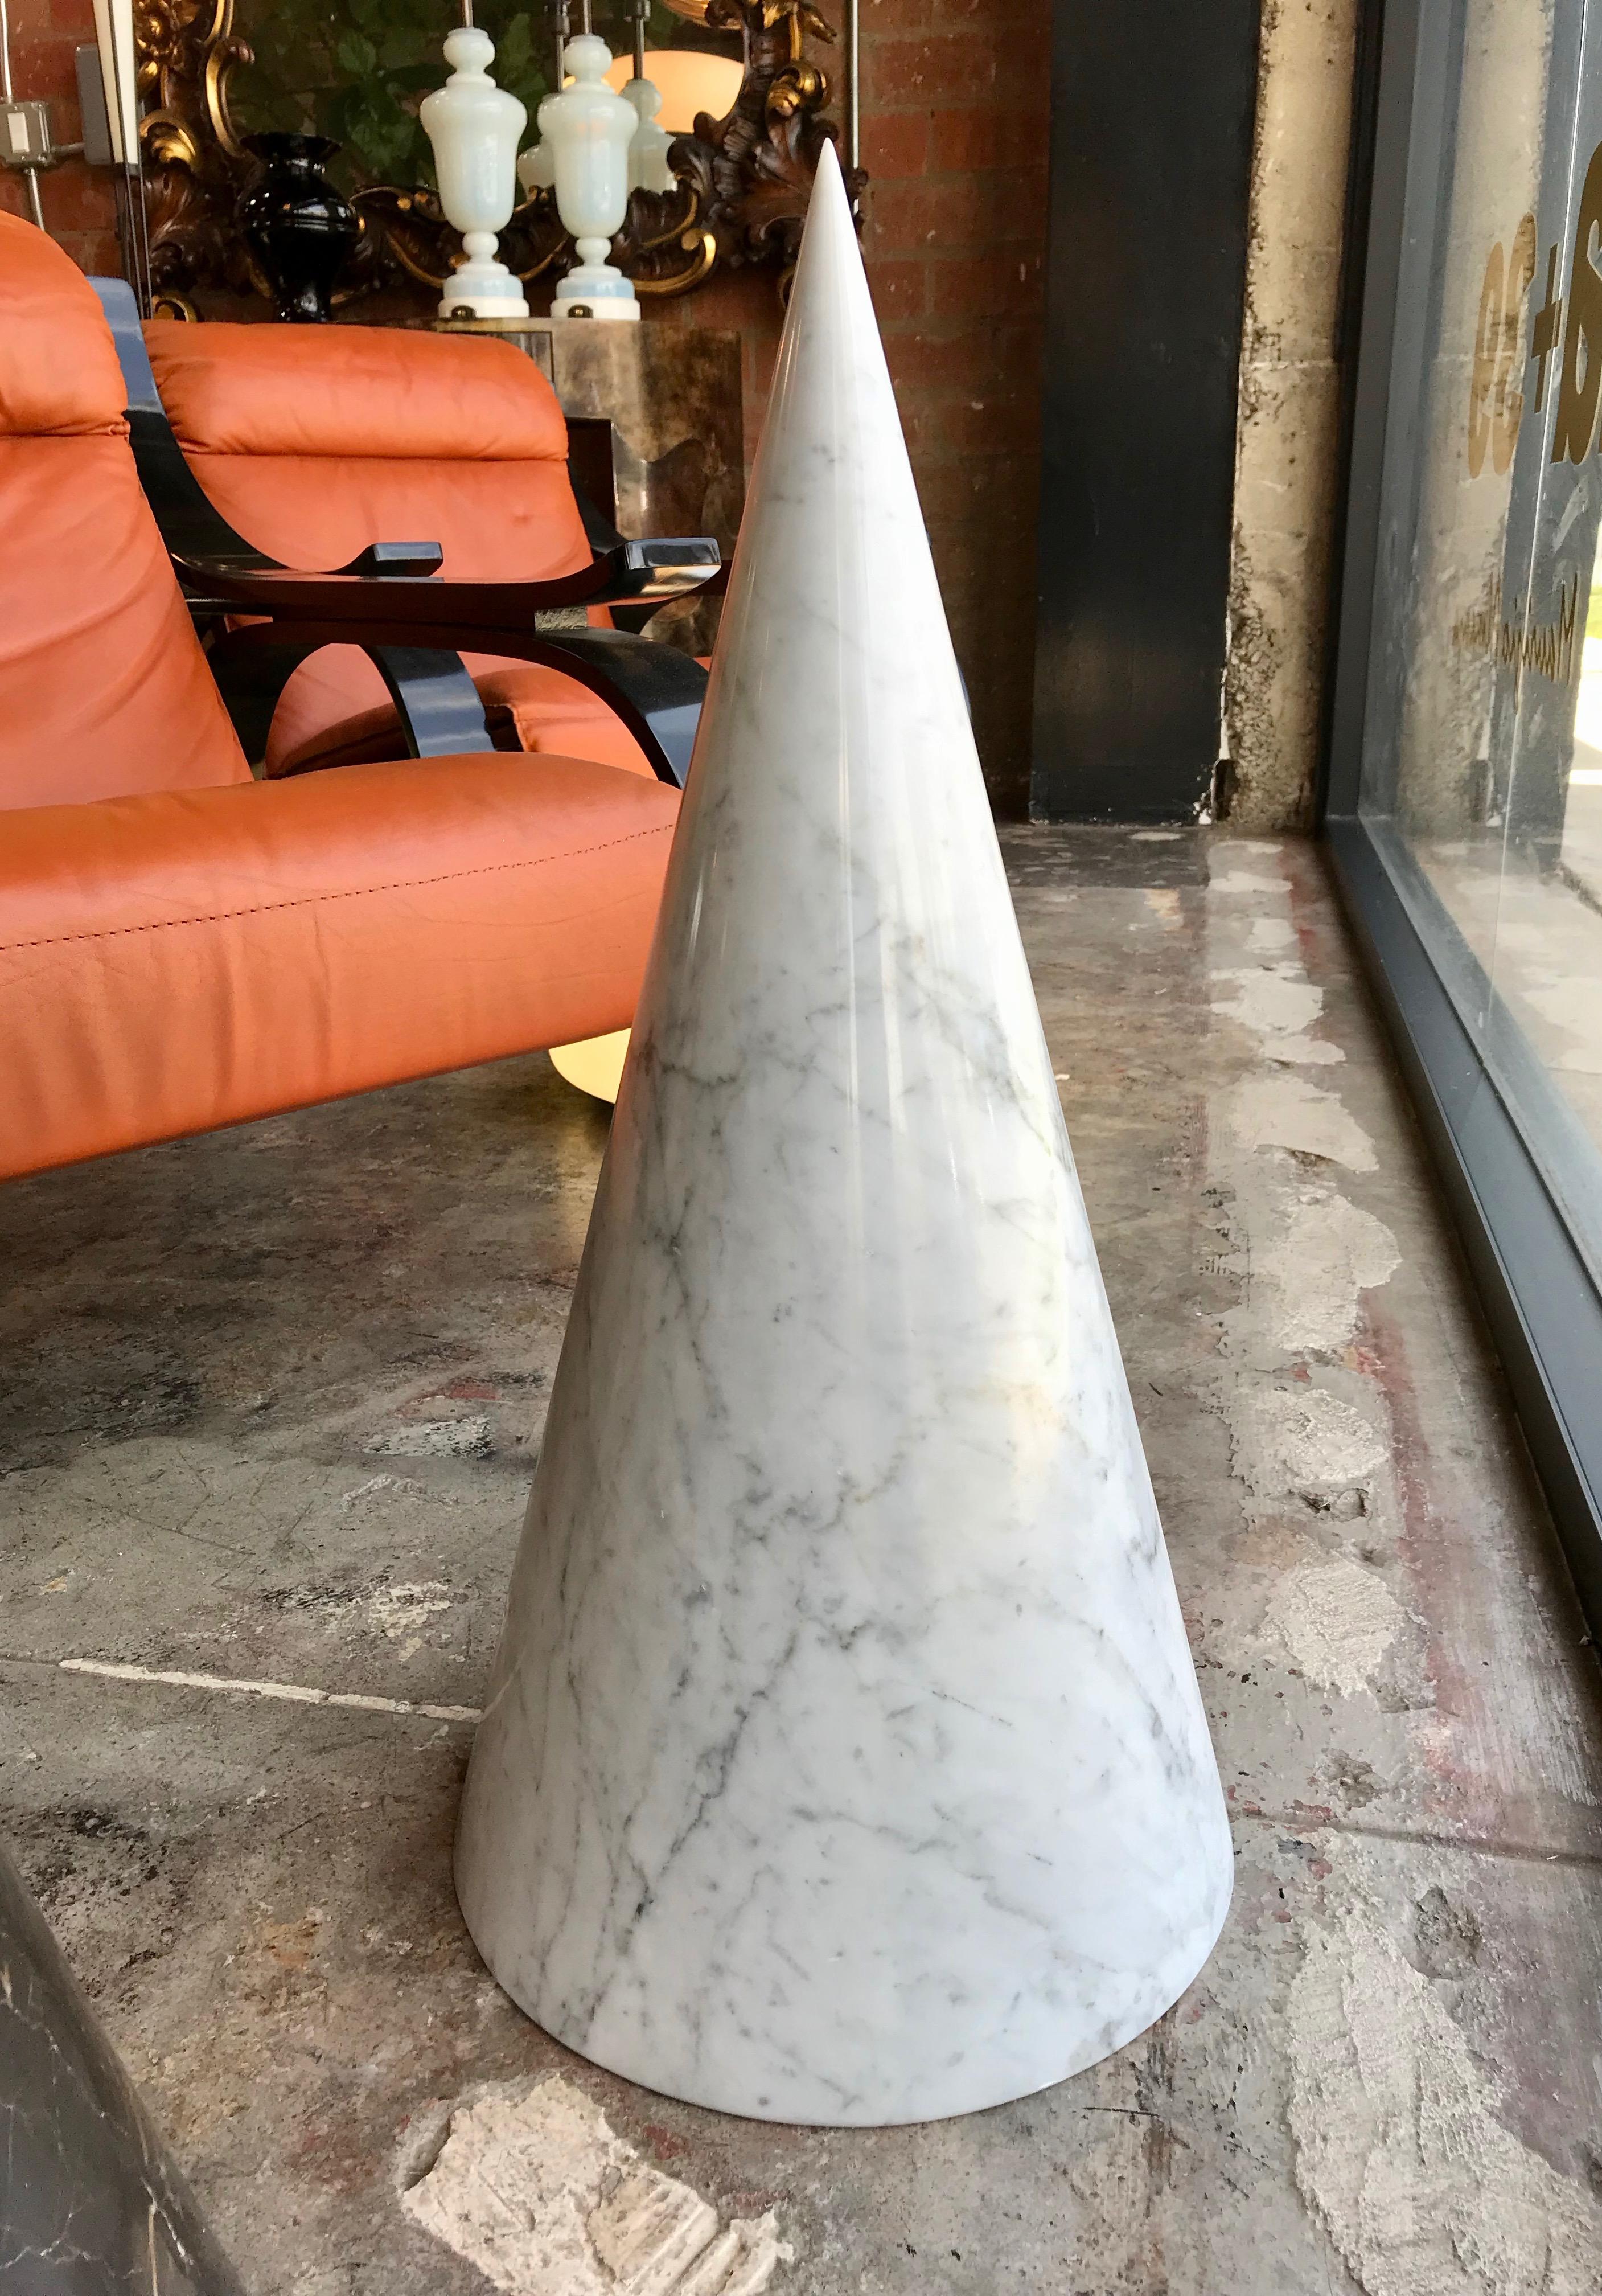 The design is architectural in the sense that the construction is monumental and solid.
The white cone is minimal and powerful at the same time.
Perfect for in-out door decoration.
Italian Carrara marble.